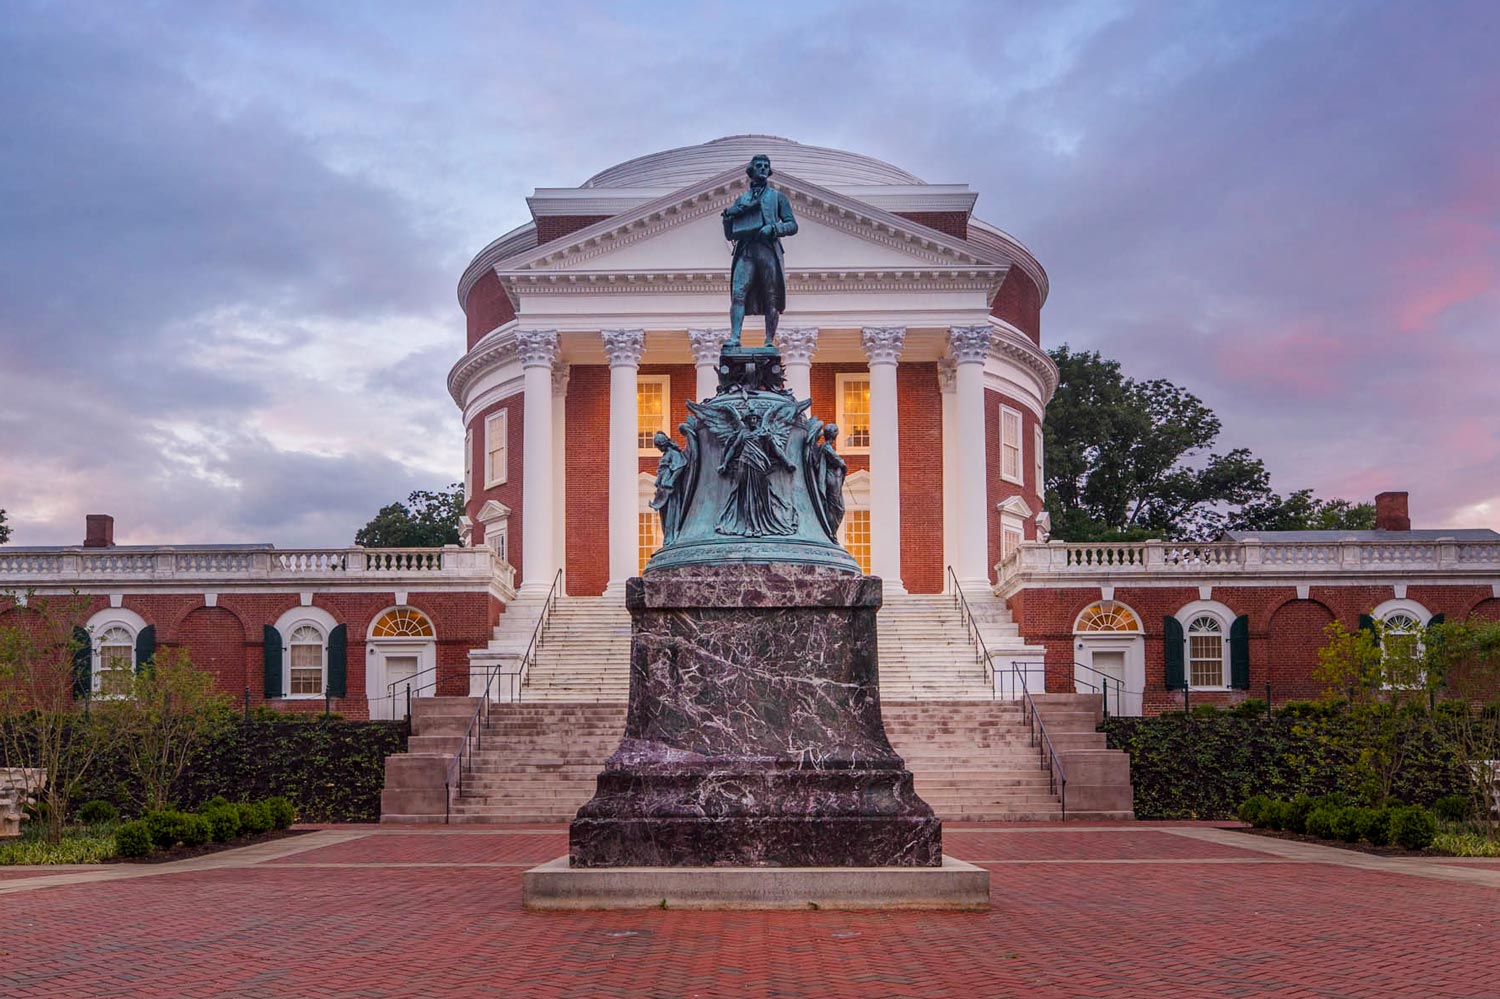 The Rotunda with the Thomas Jefferson Statue in front